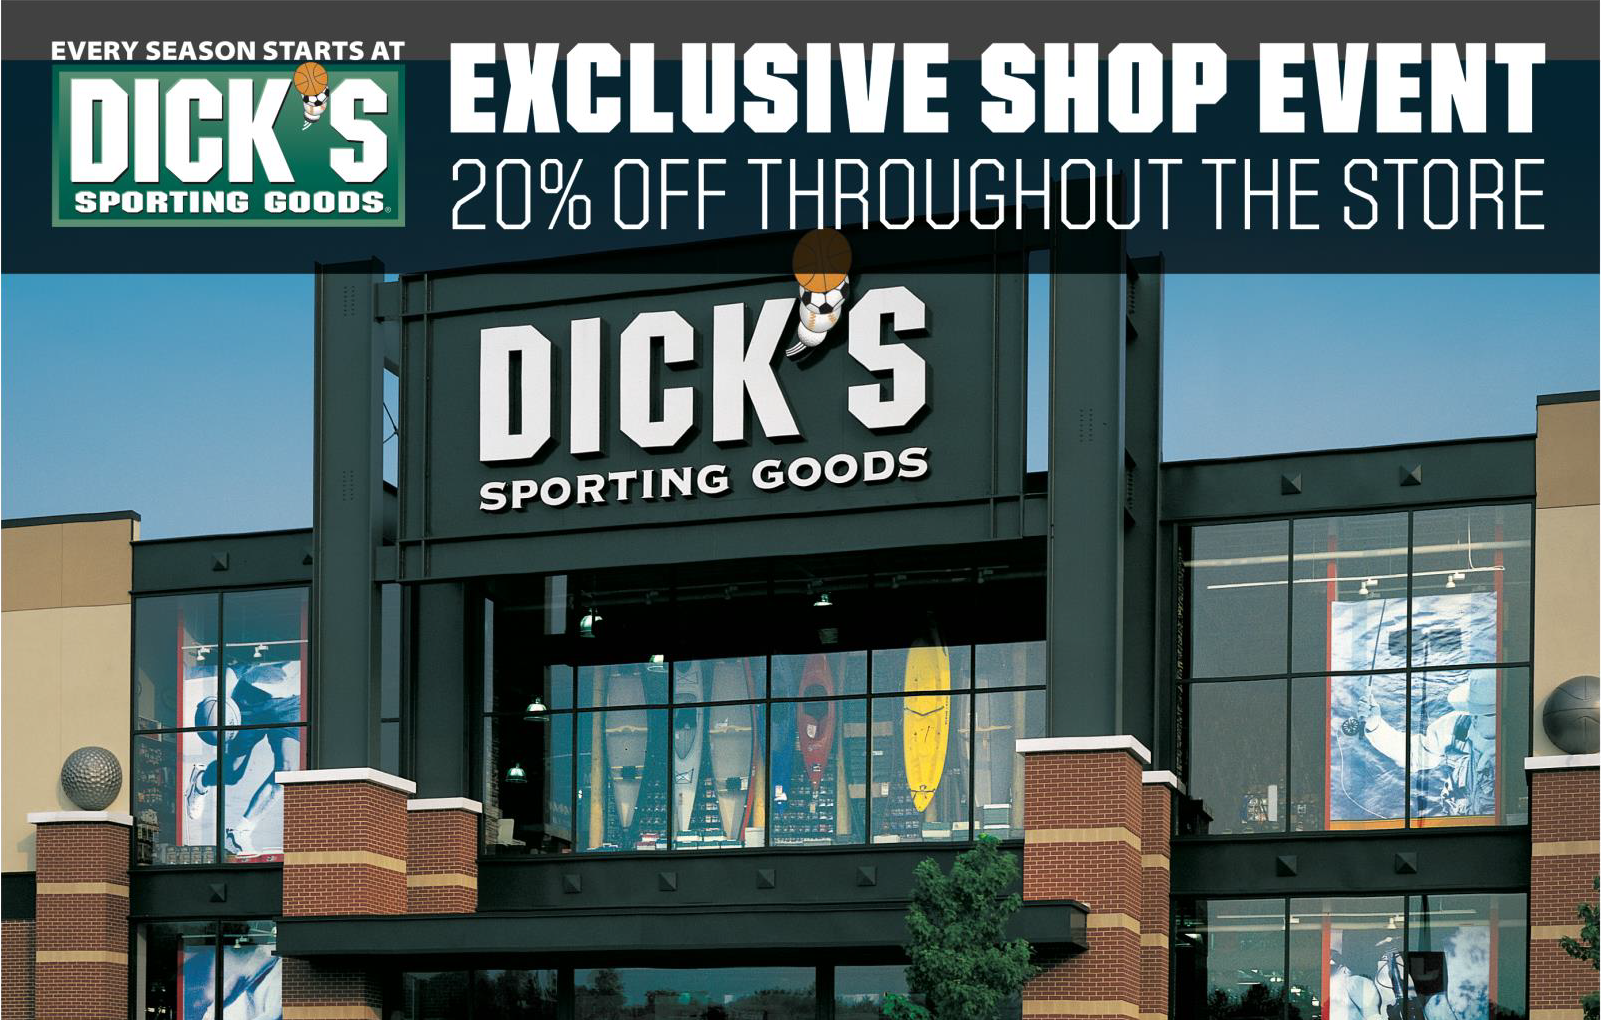 Sports stores like dicks